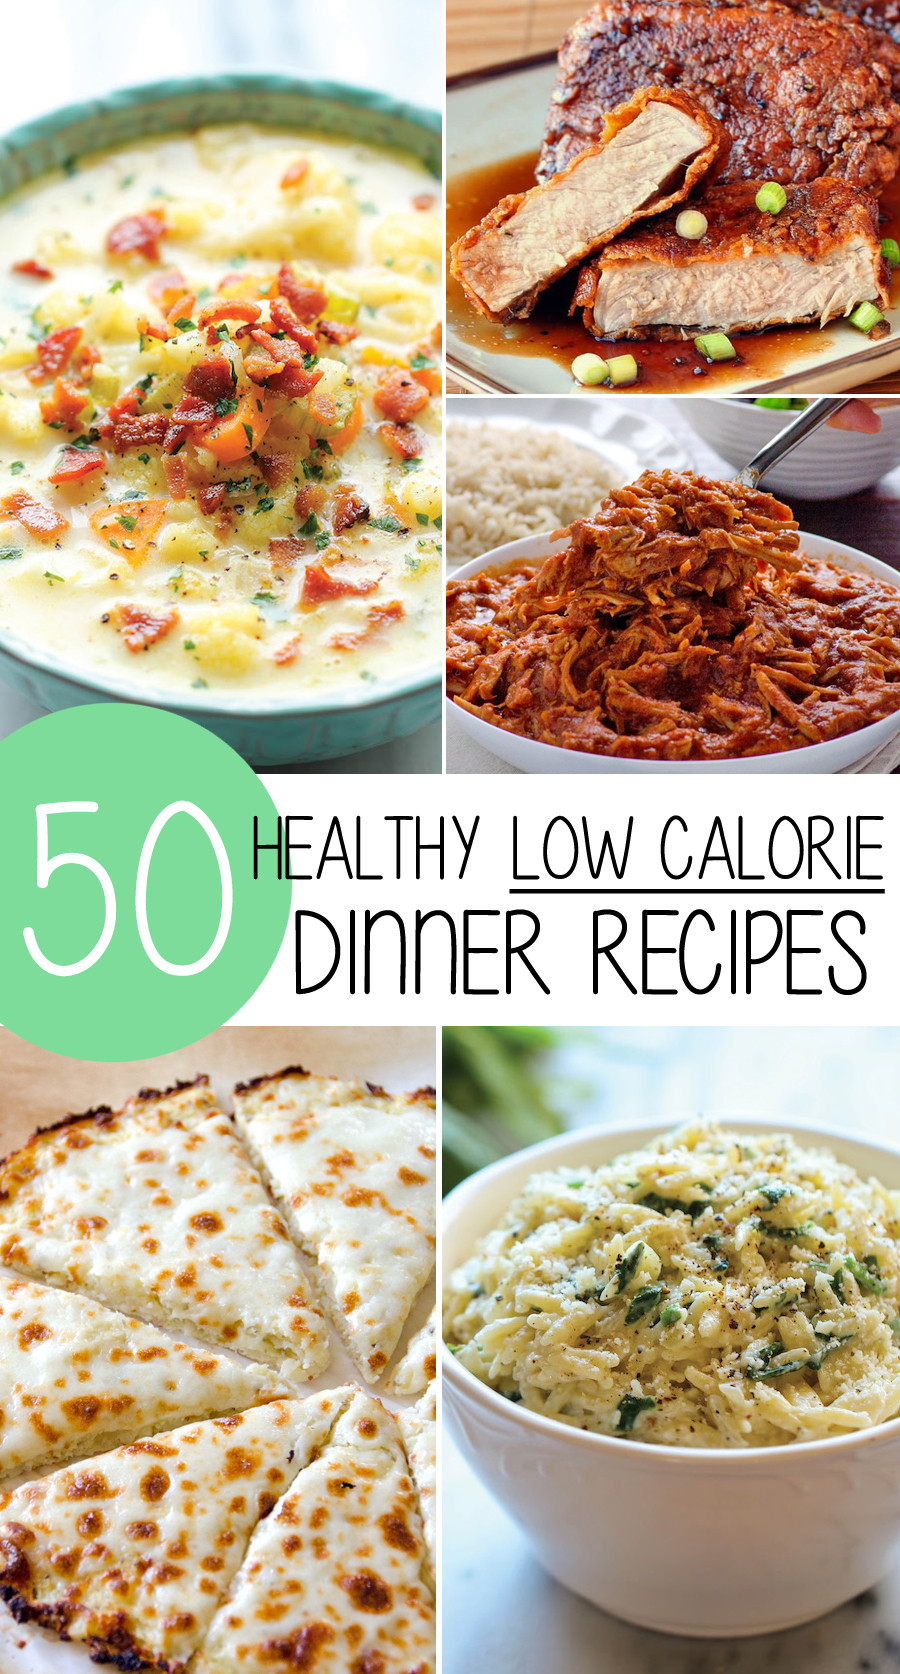 Healthy Food Recipes For Weight Loss
 50 Healthy Low Calorie Weight Loss Dinner Recipes